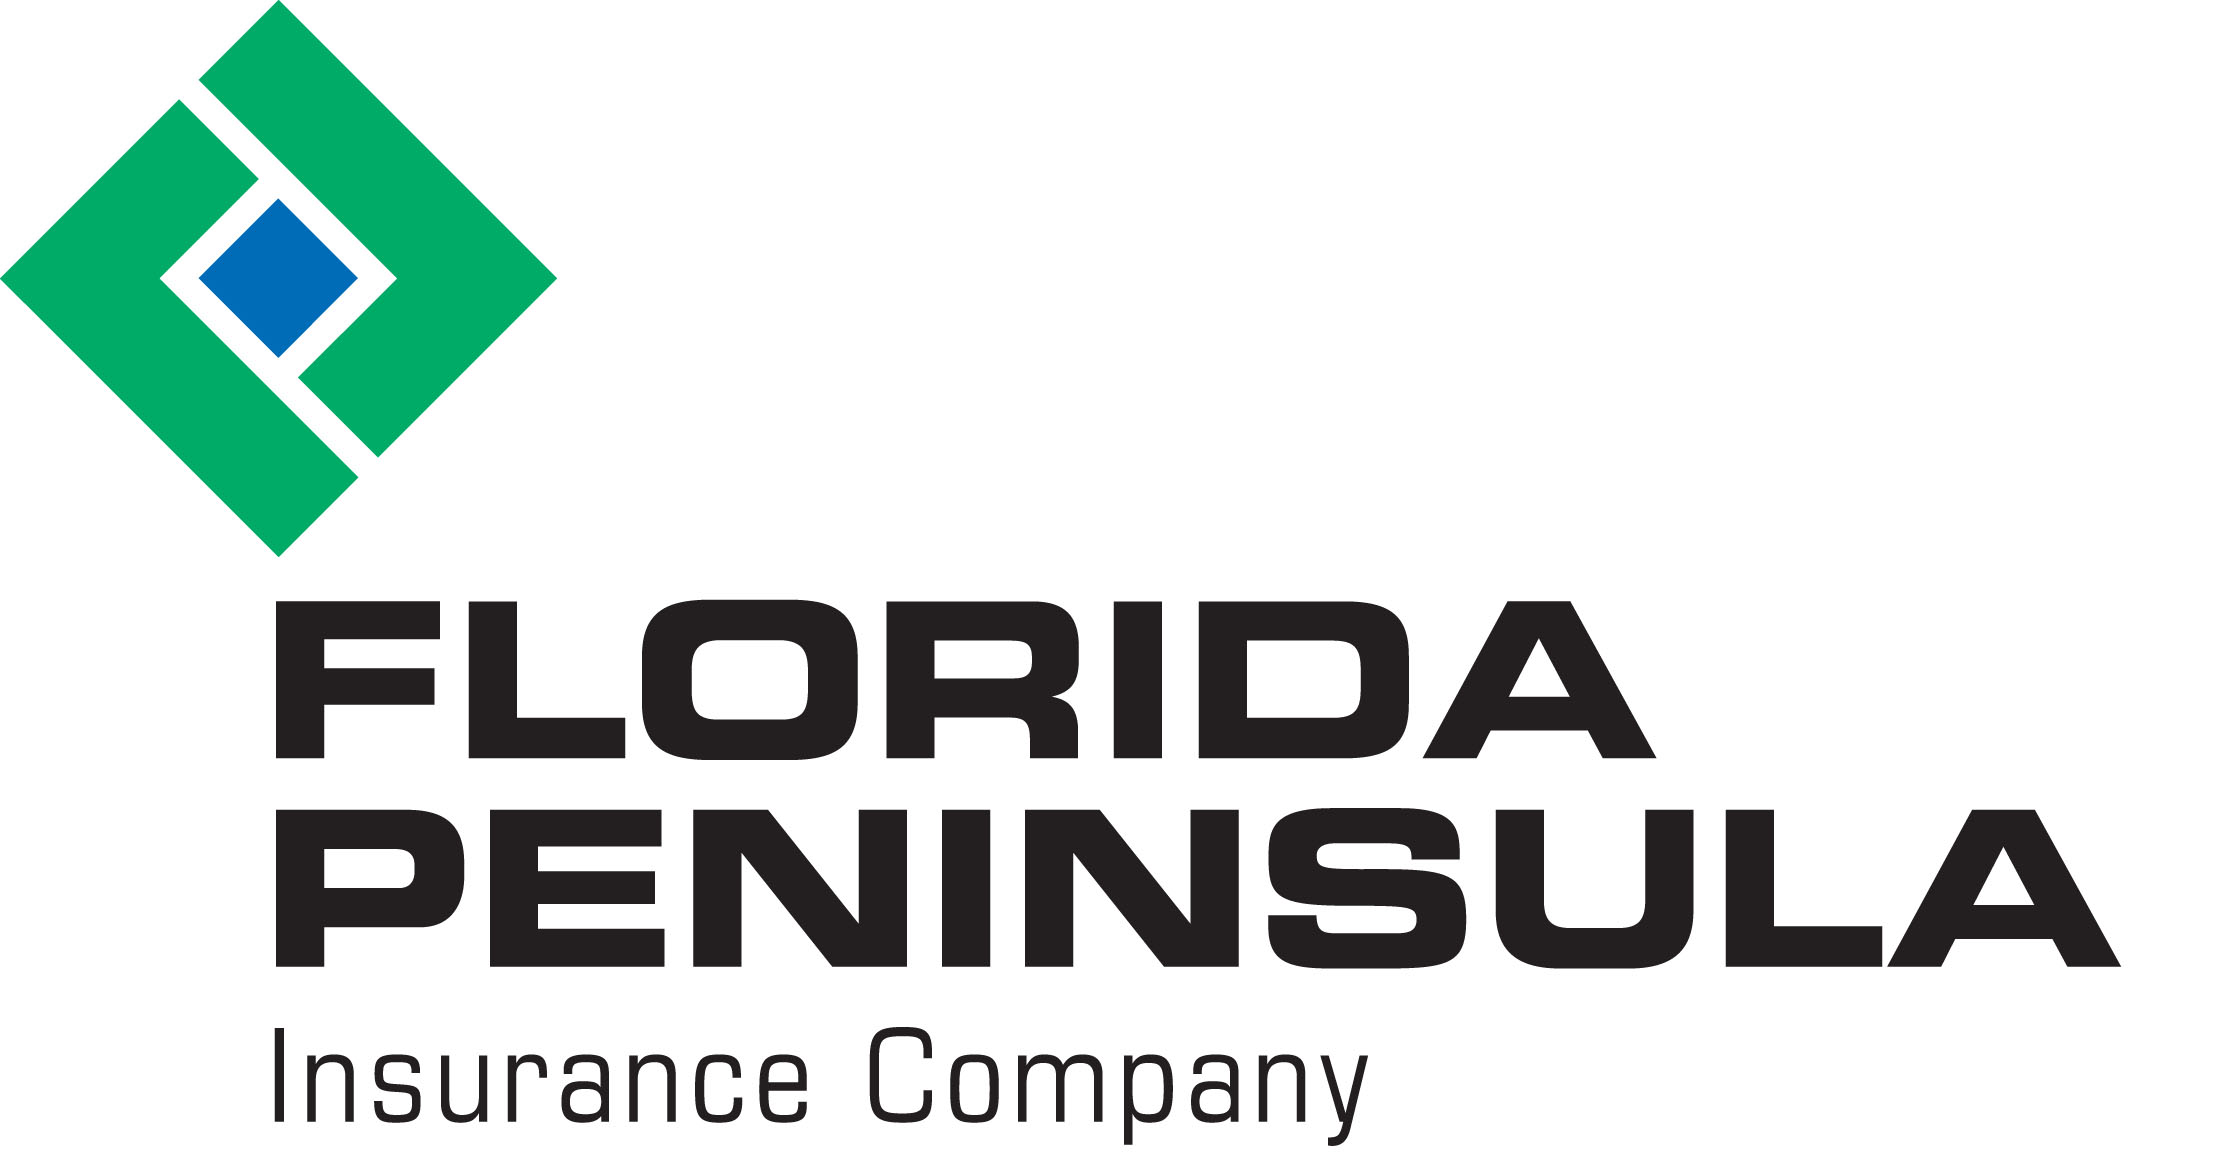 Florida Peninsula Insurance Company, Friday, September 30, 2022, Press release picture